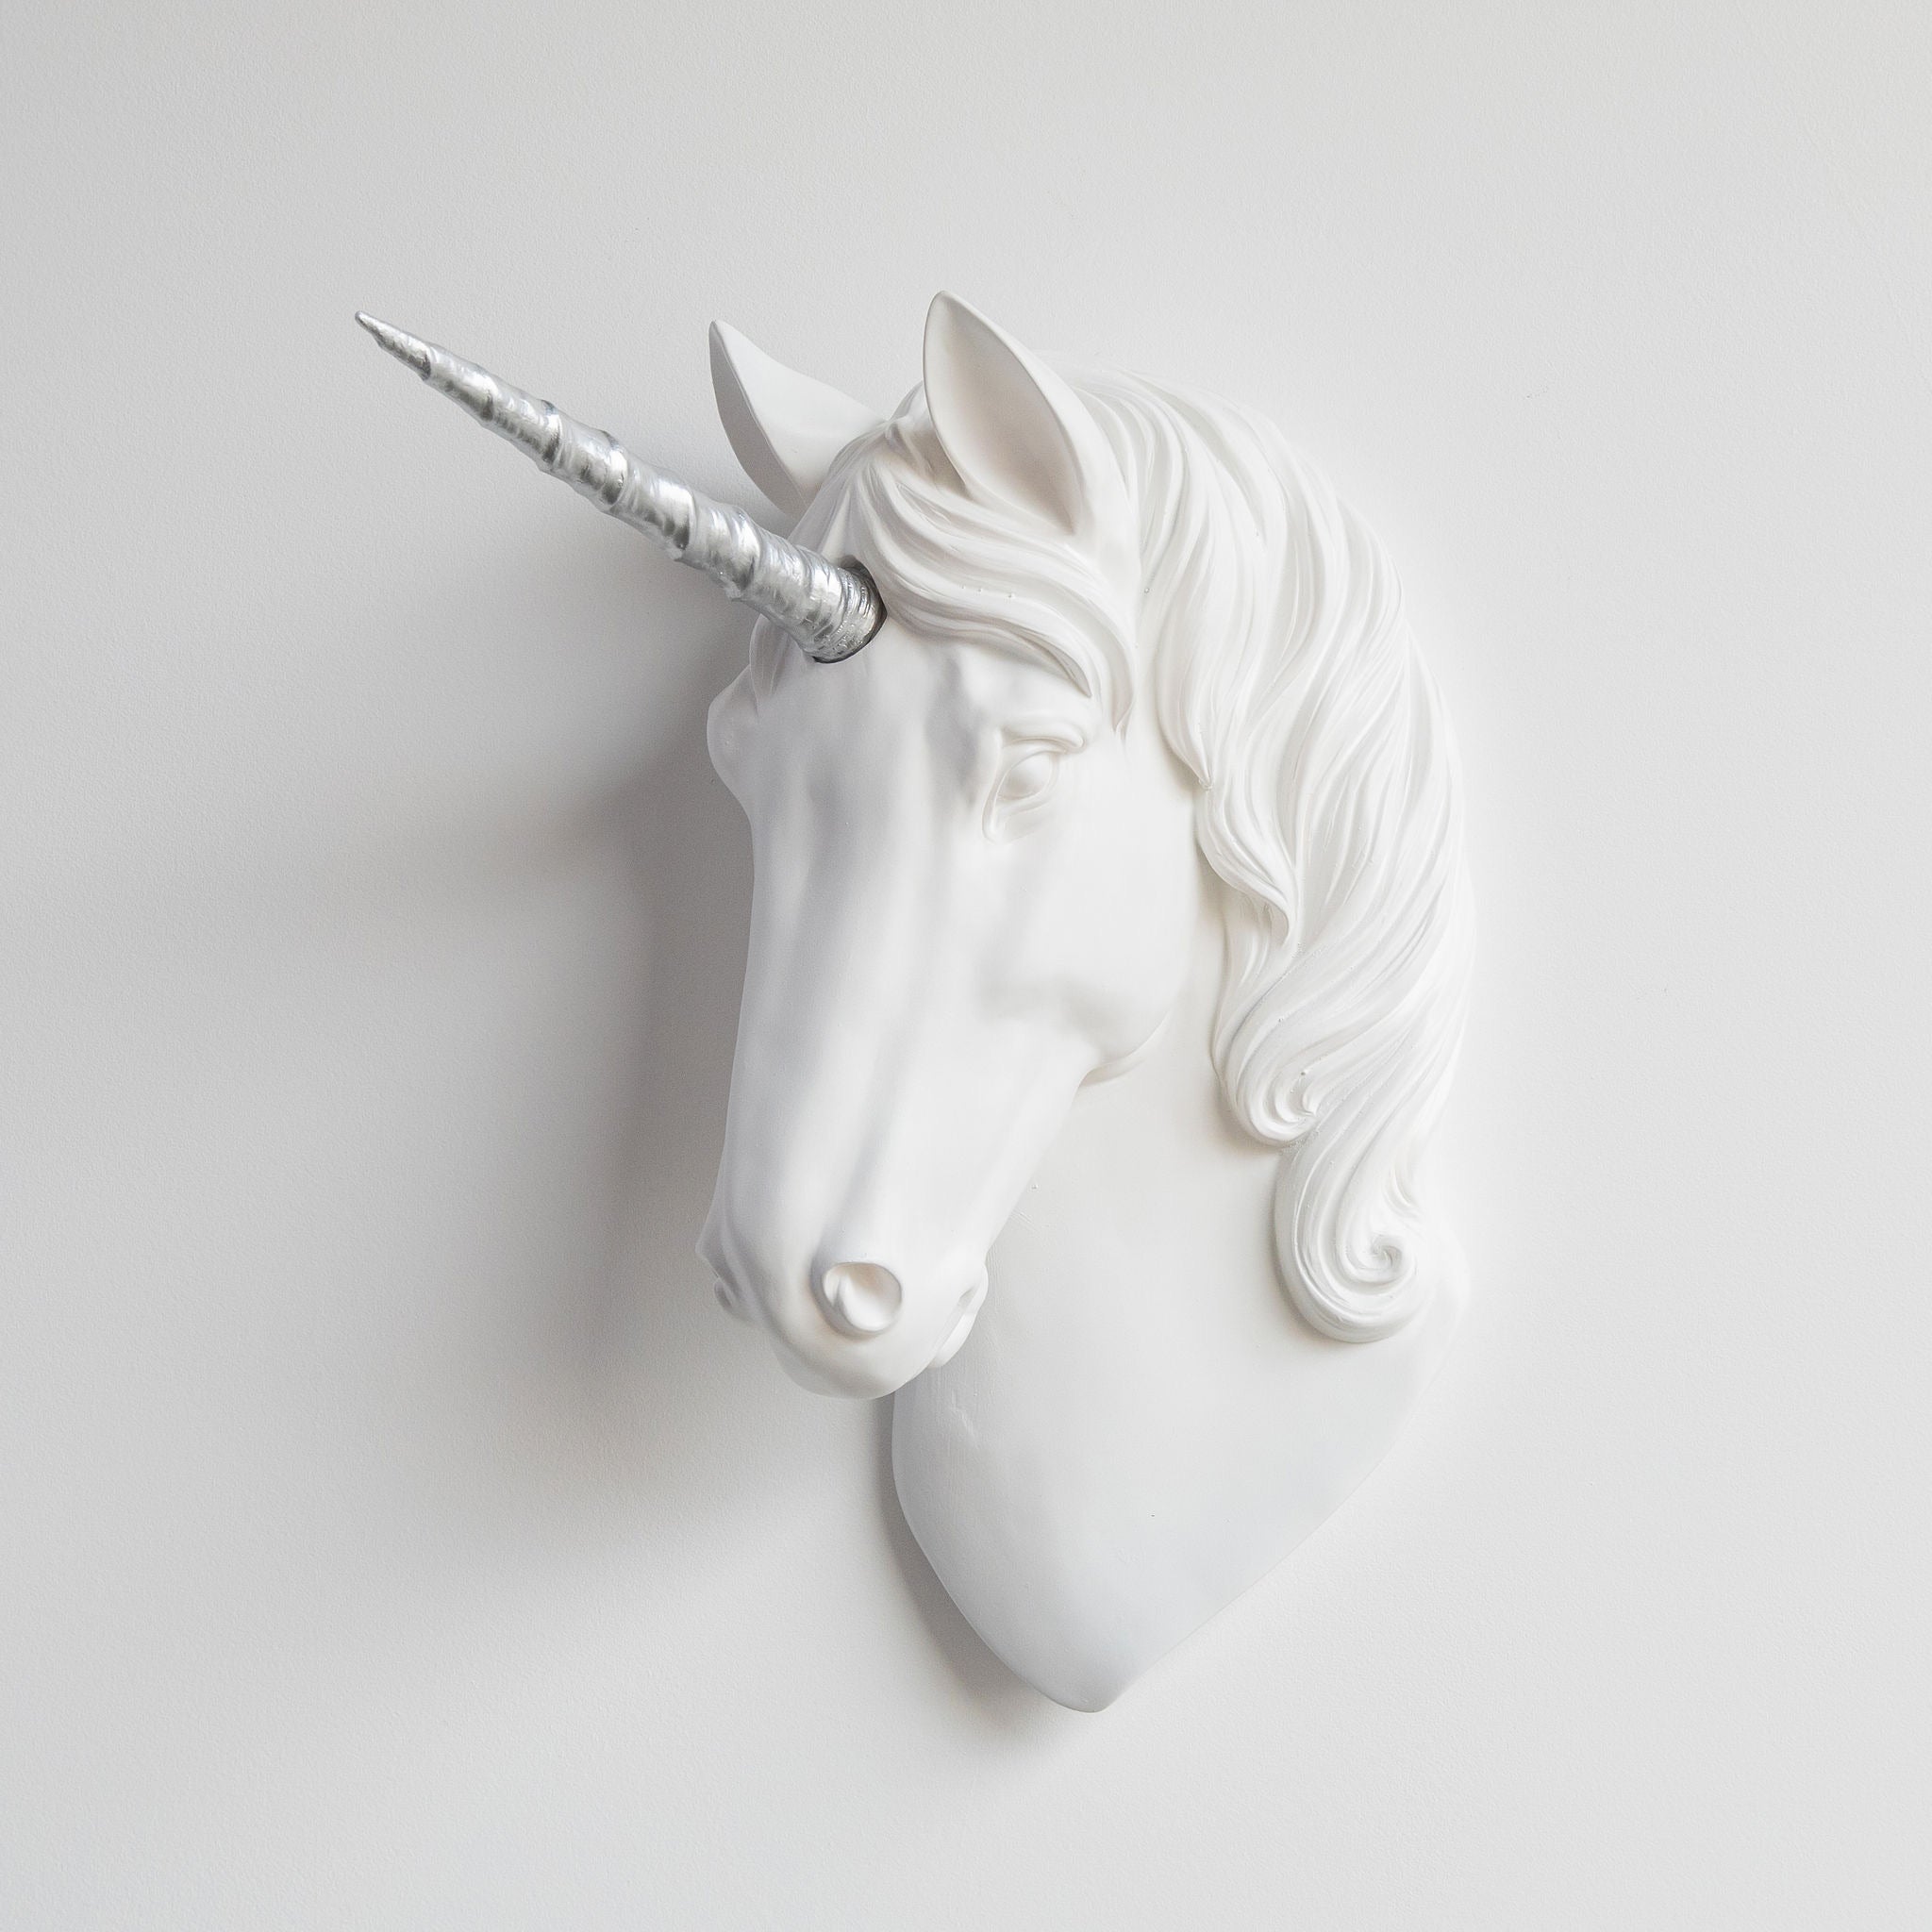 Faux Unicorn Wall Plaque // White and Silver